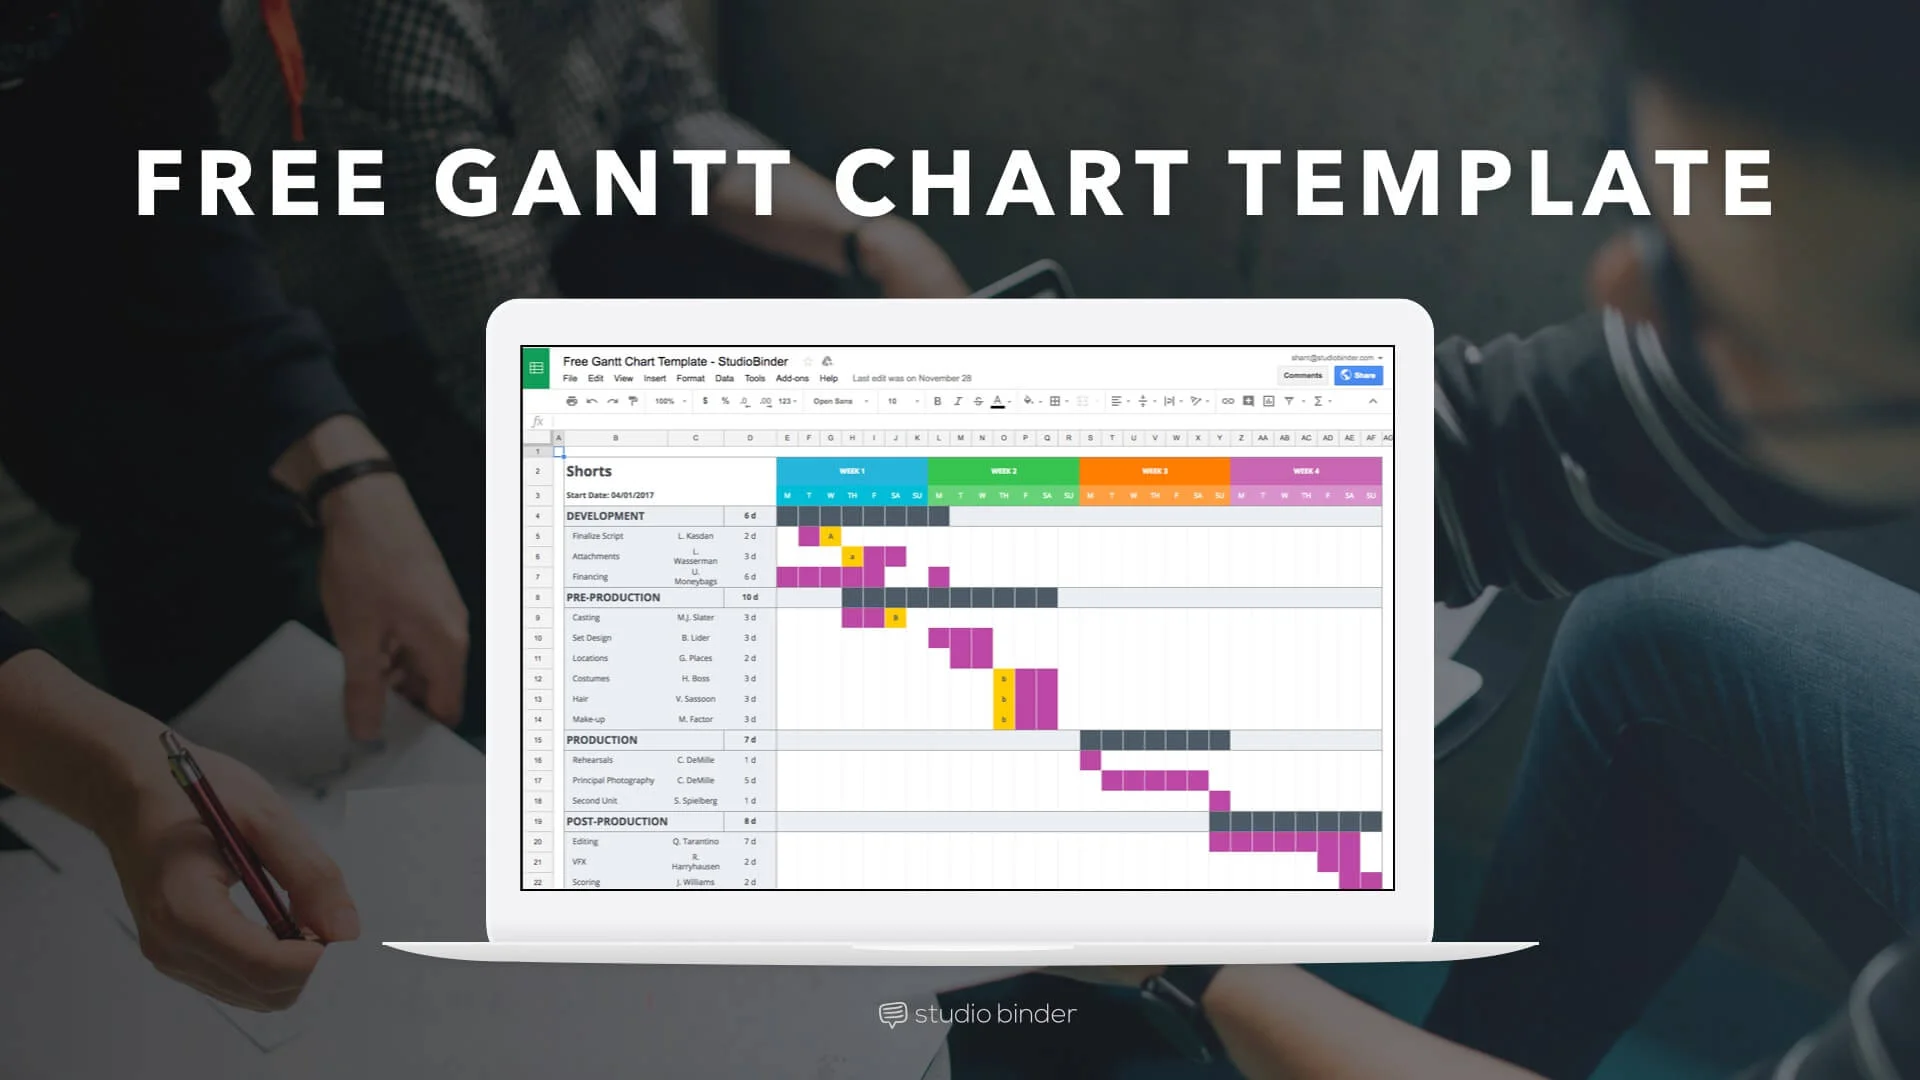 Free Gantt Chart Template for Film, Video and Photo Productions - Social - StudioBinder